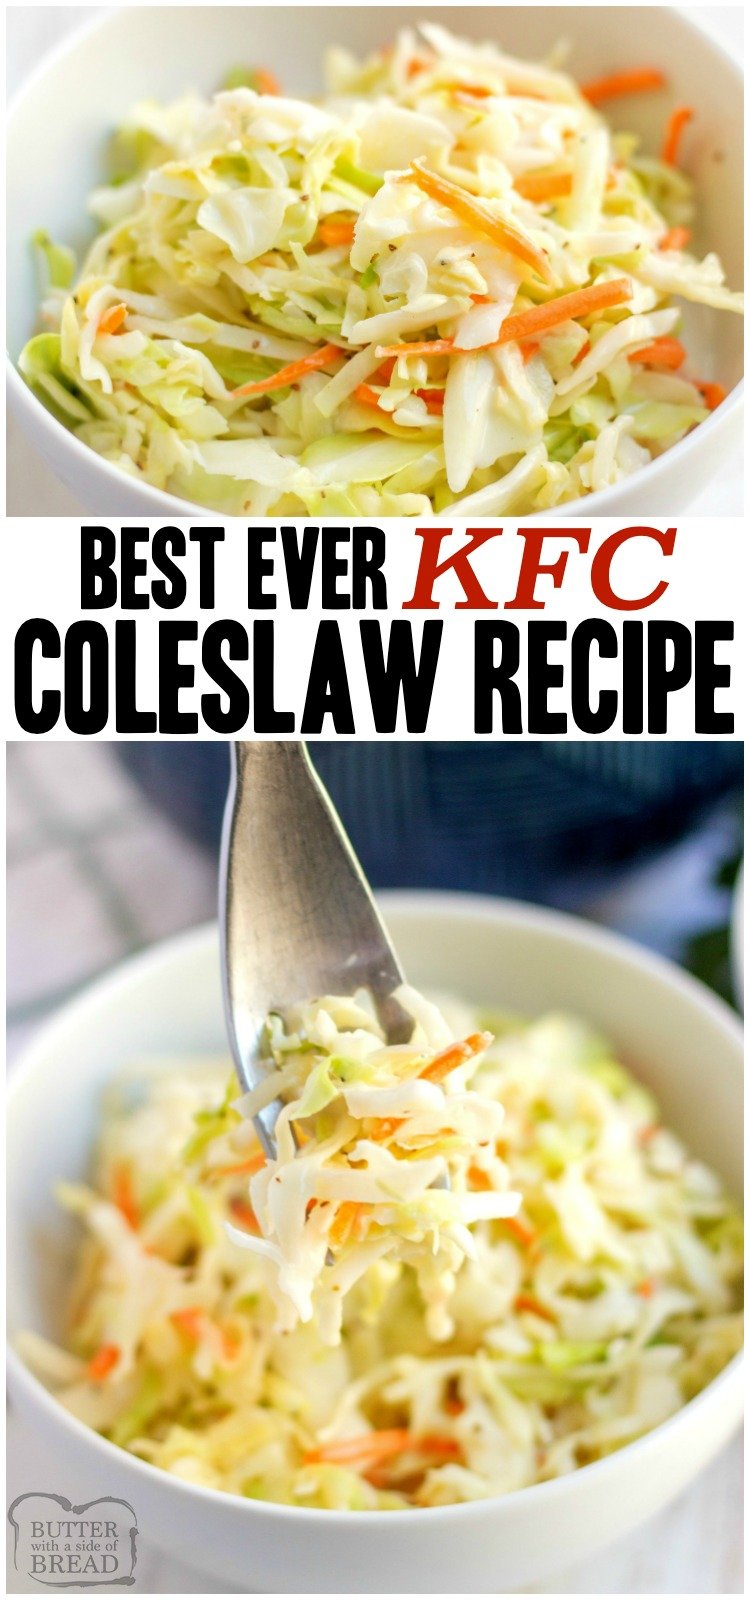 Easy Coleslaw recipe tastes just like KFC's & comes together in minutes! Best ever coleslaw dressing and learn my secret tip that takes your coleslaw from good to GREAT! #coleslaw #recipe #food #cabbage #KFC from BUTTER WITH A SIDE OF BREAD